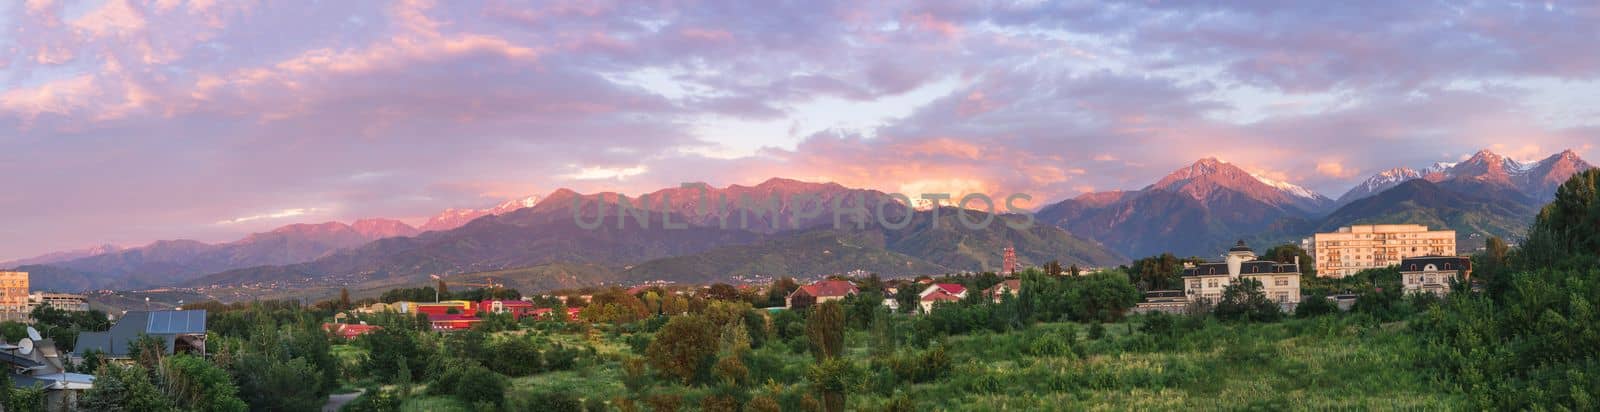 Panorama of the city of Almaty immersed in summer greenery against the backdrop of mountains in sunset lighting. Almaty, Kazakhstan - June 18, 2022